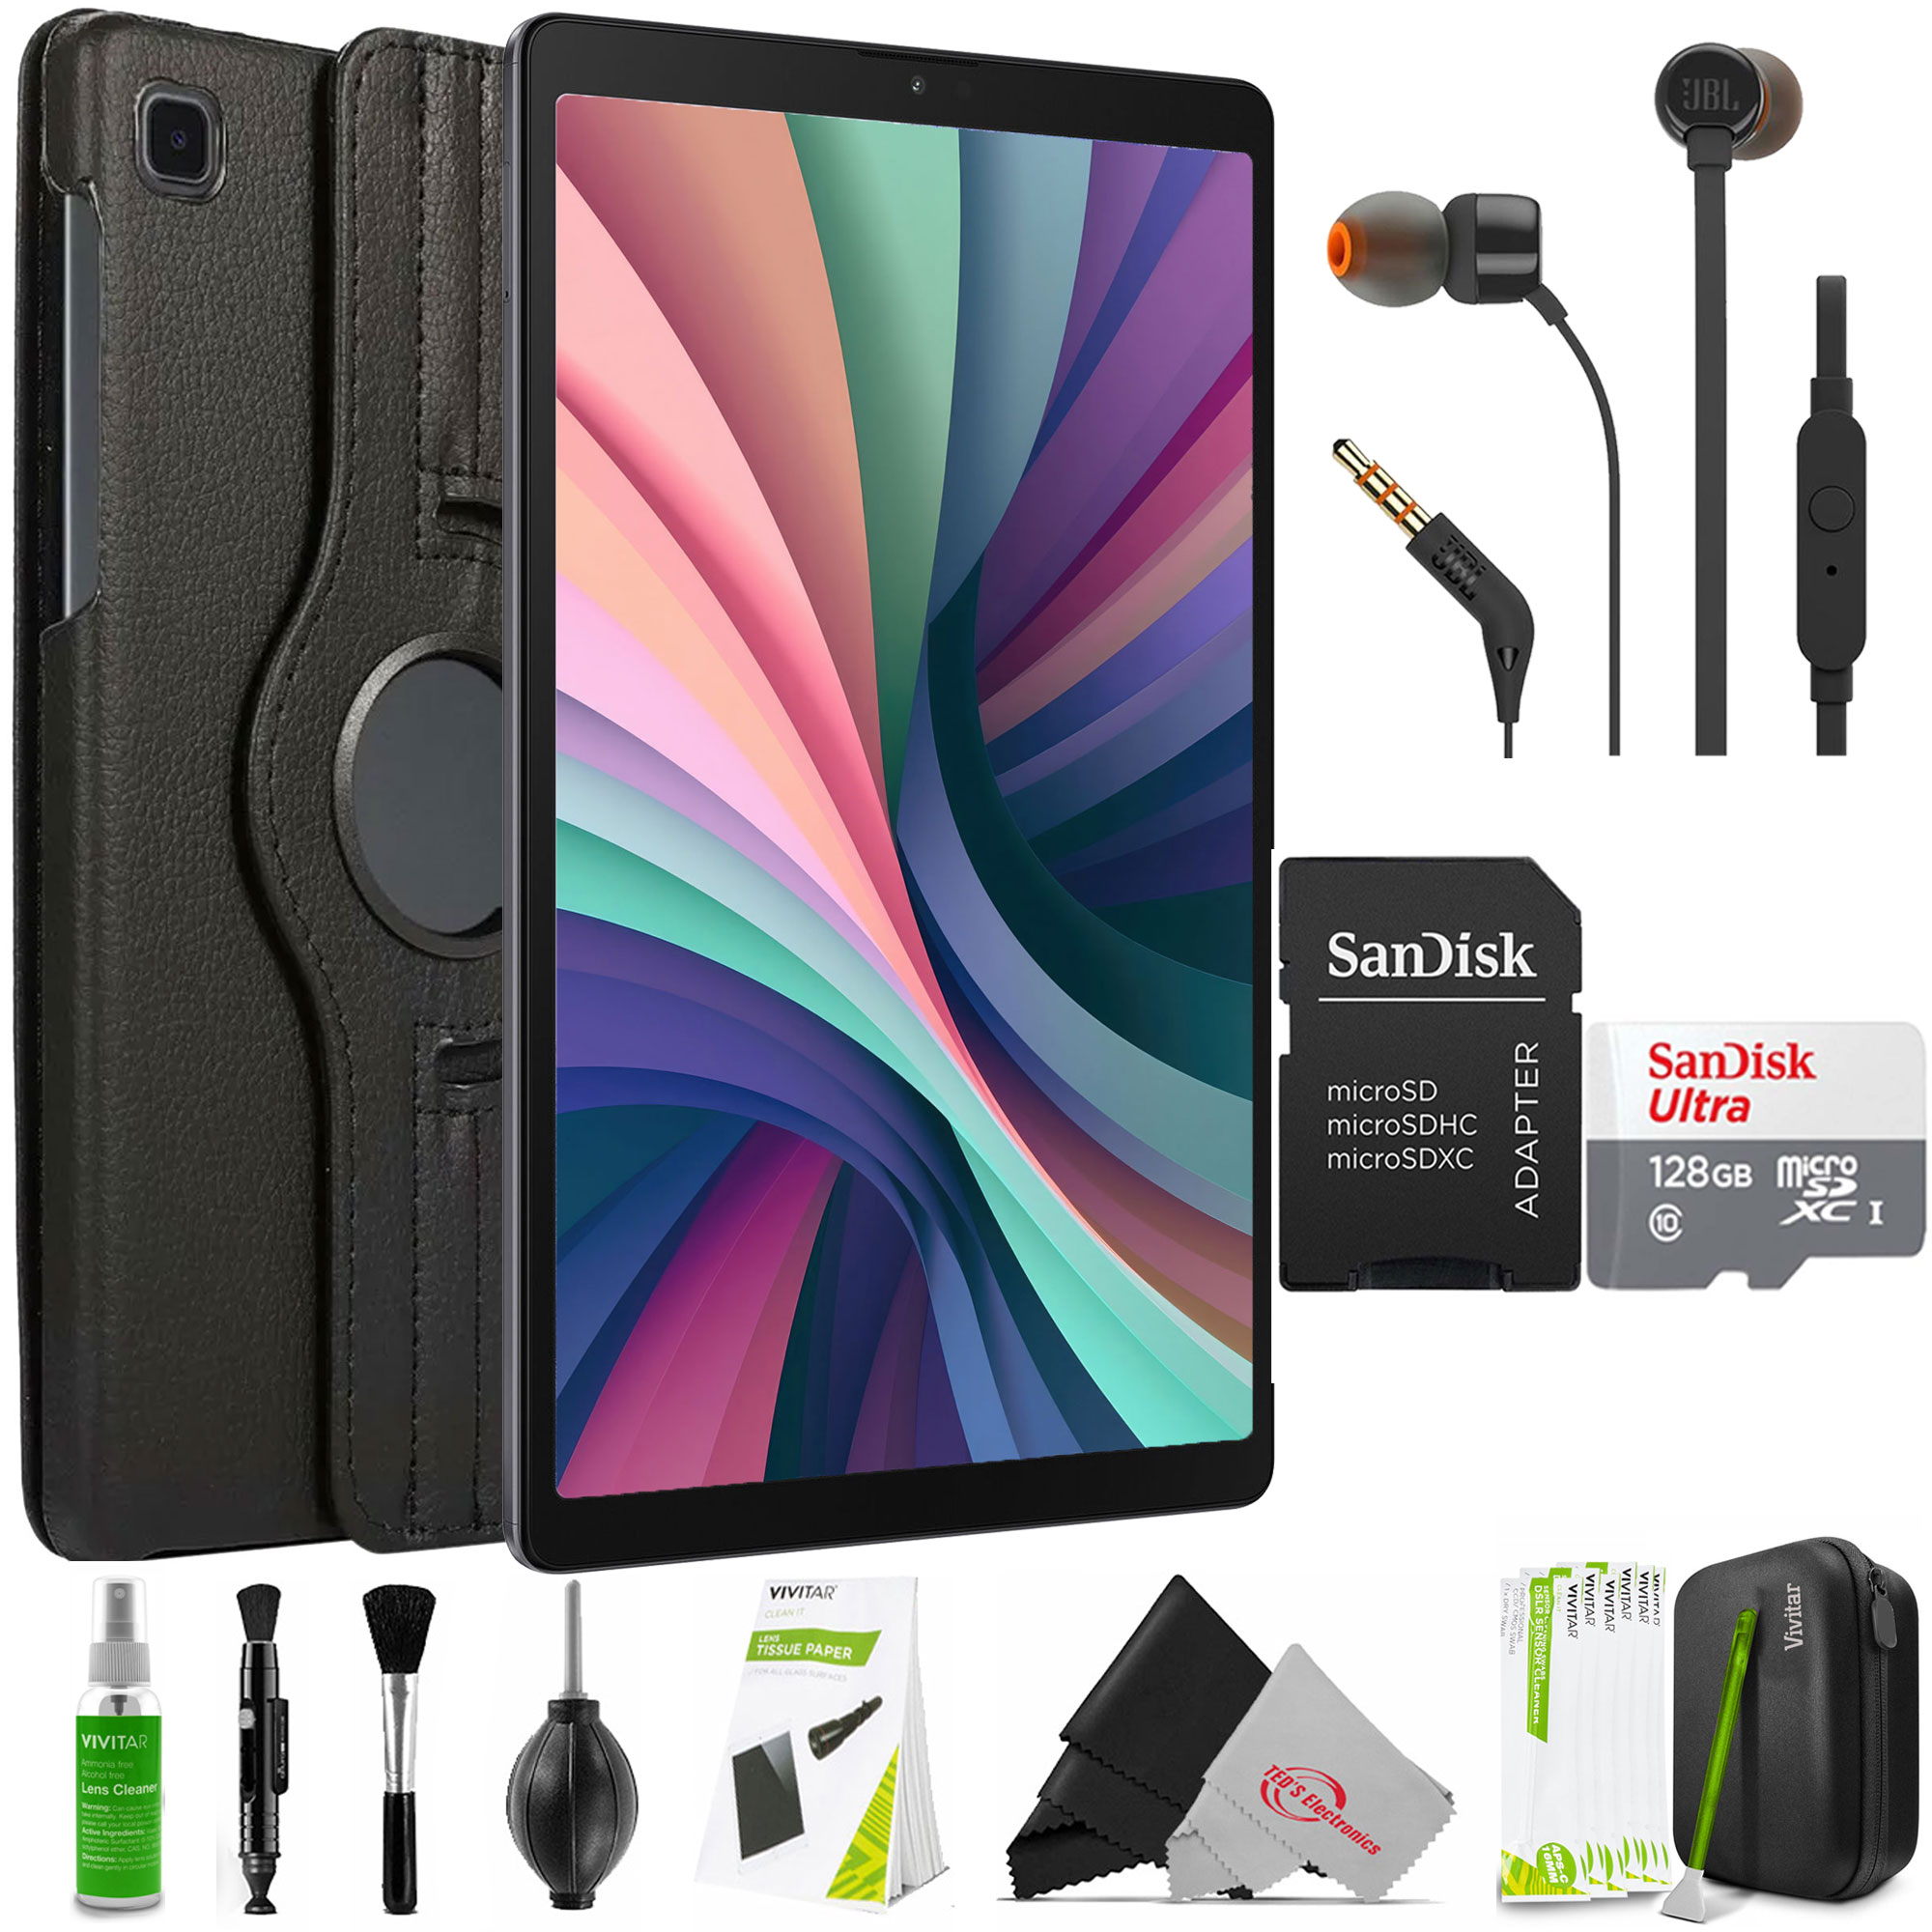 Samsung Bundle: Leather Case Cover for Samsung Galaxy Tab A7 + Wireless Microphone Kit